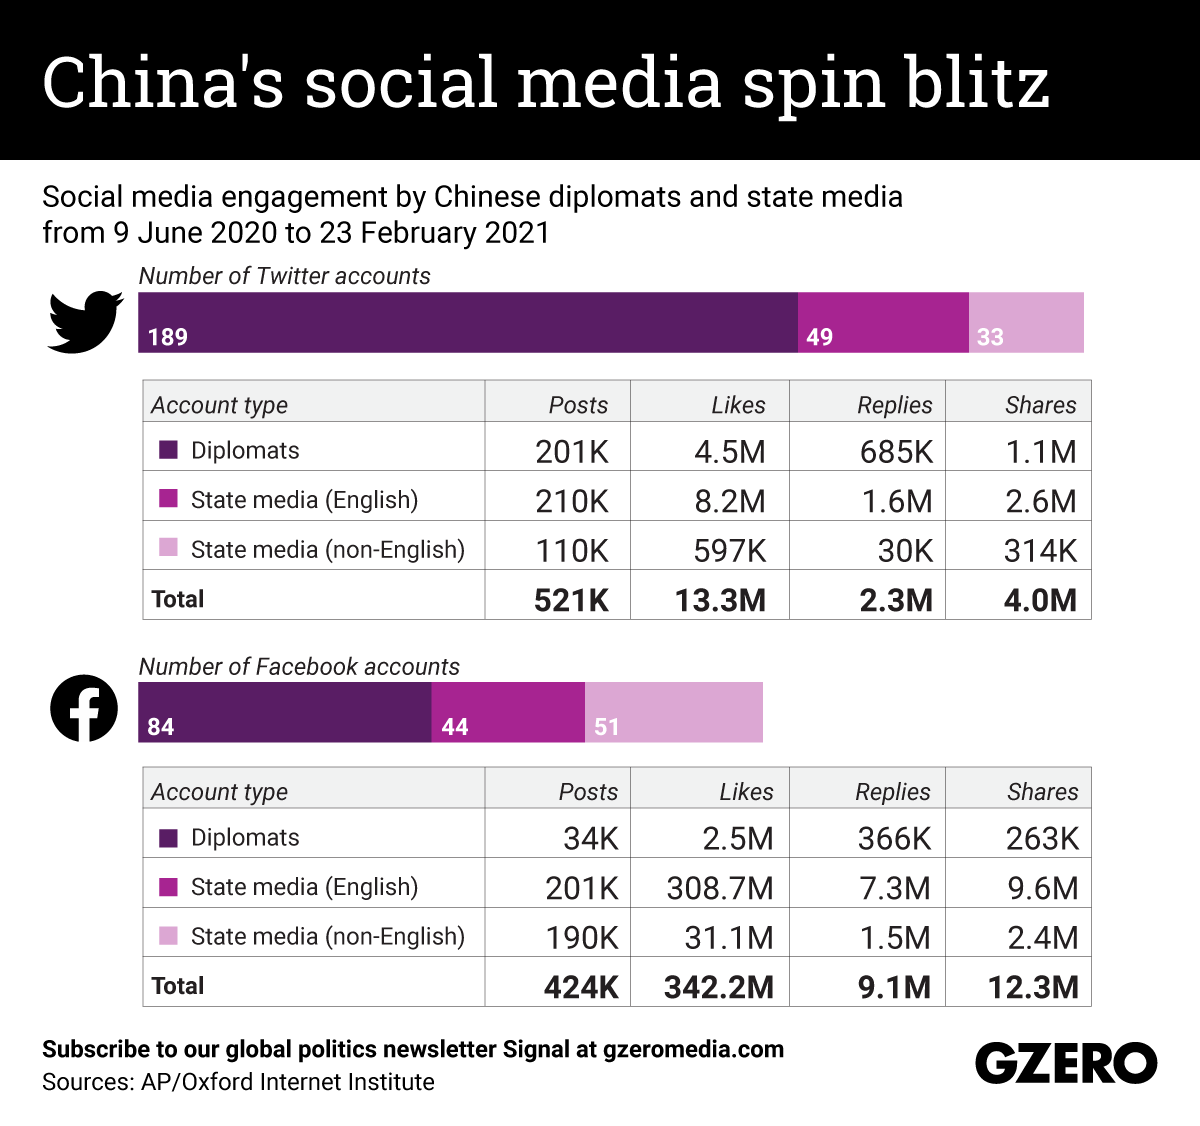 The Graphic Truth: China's social media spin blitz